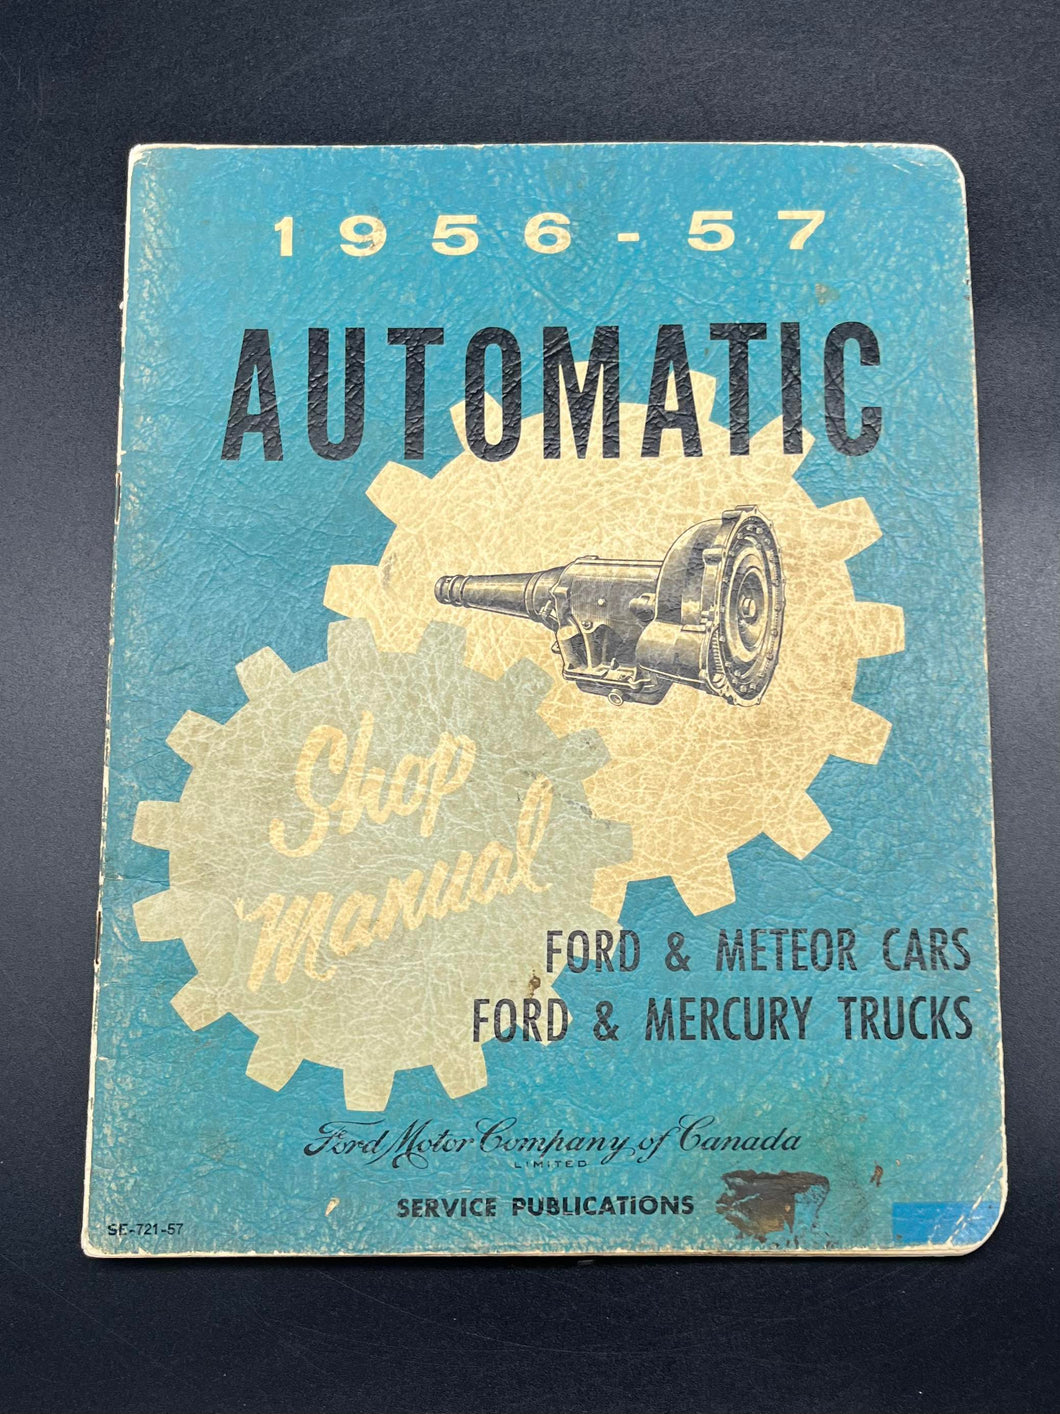 1956 - 57 Automatic Shop Manual - Ford & Meteor Cars, Ford & Mercury Trucks